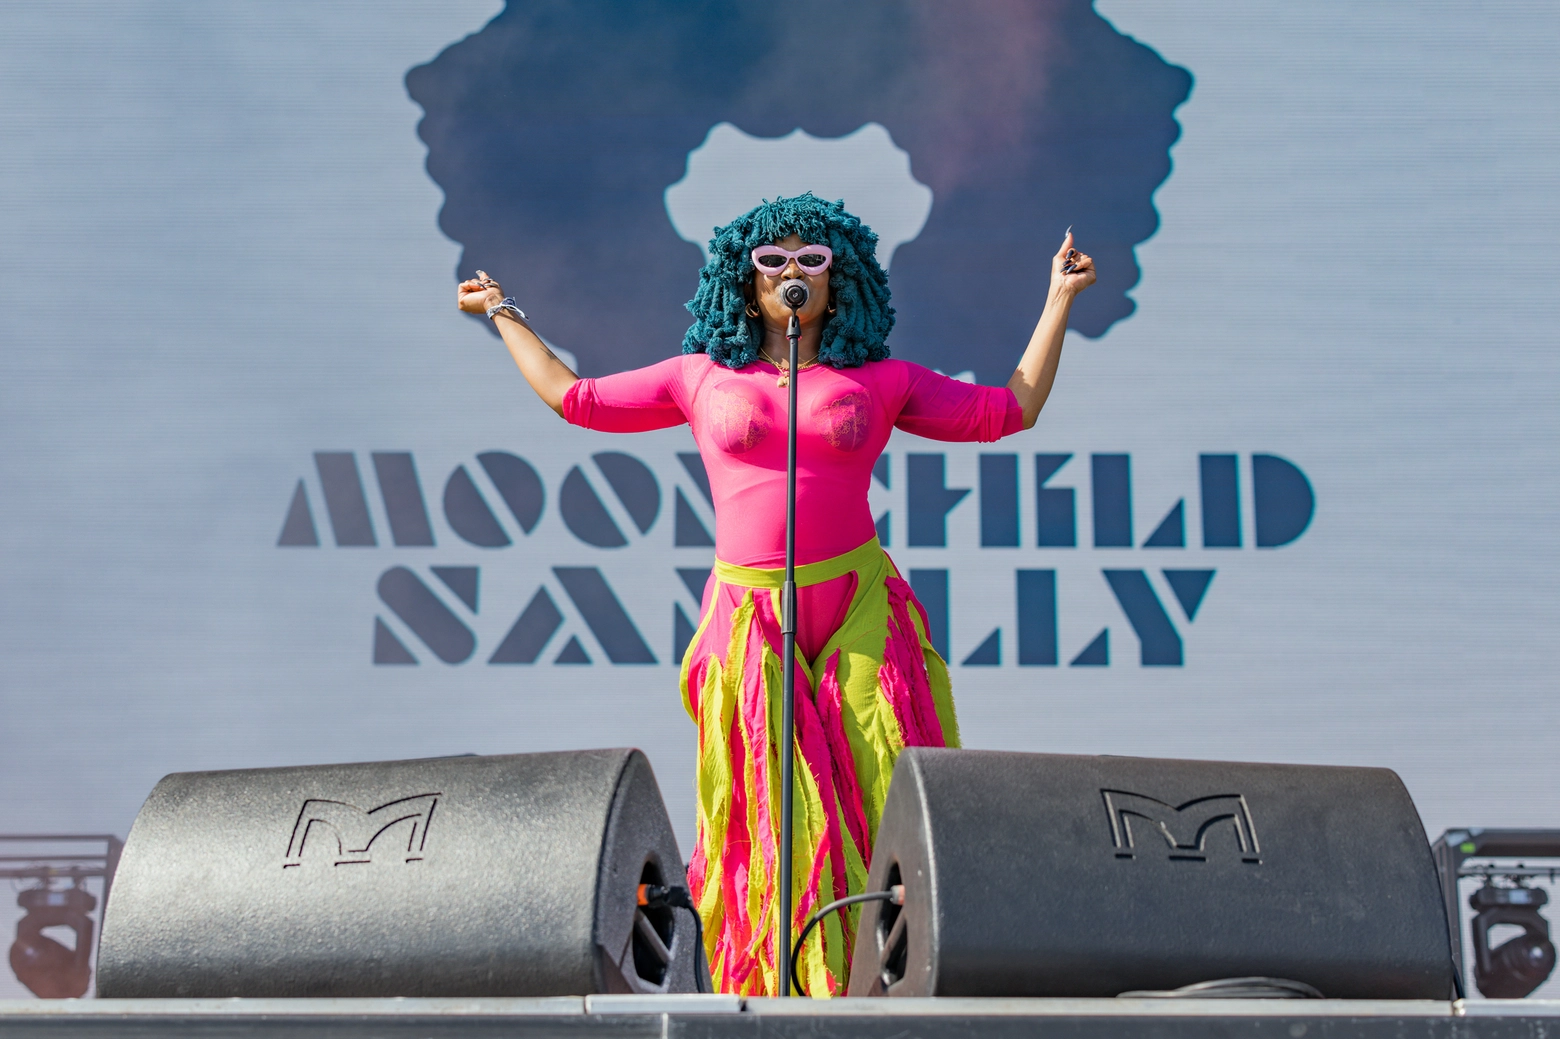 Moonchild Sanelly, Lollapalooza Berlino, Germania (Credits ChristianHedel)